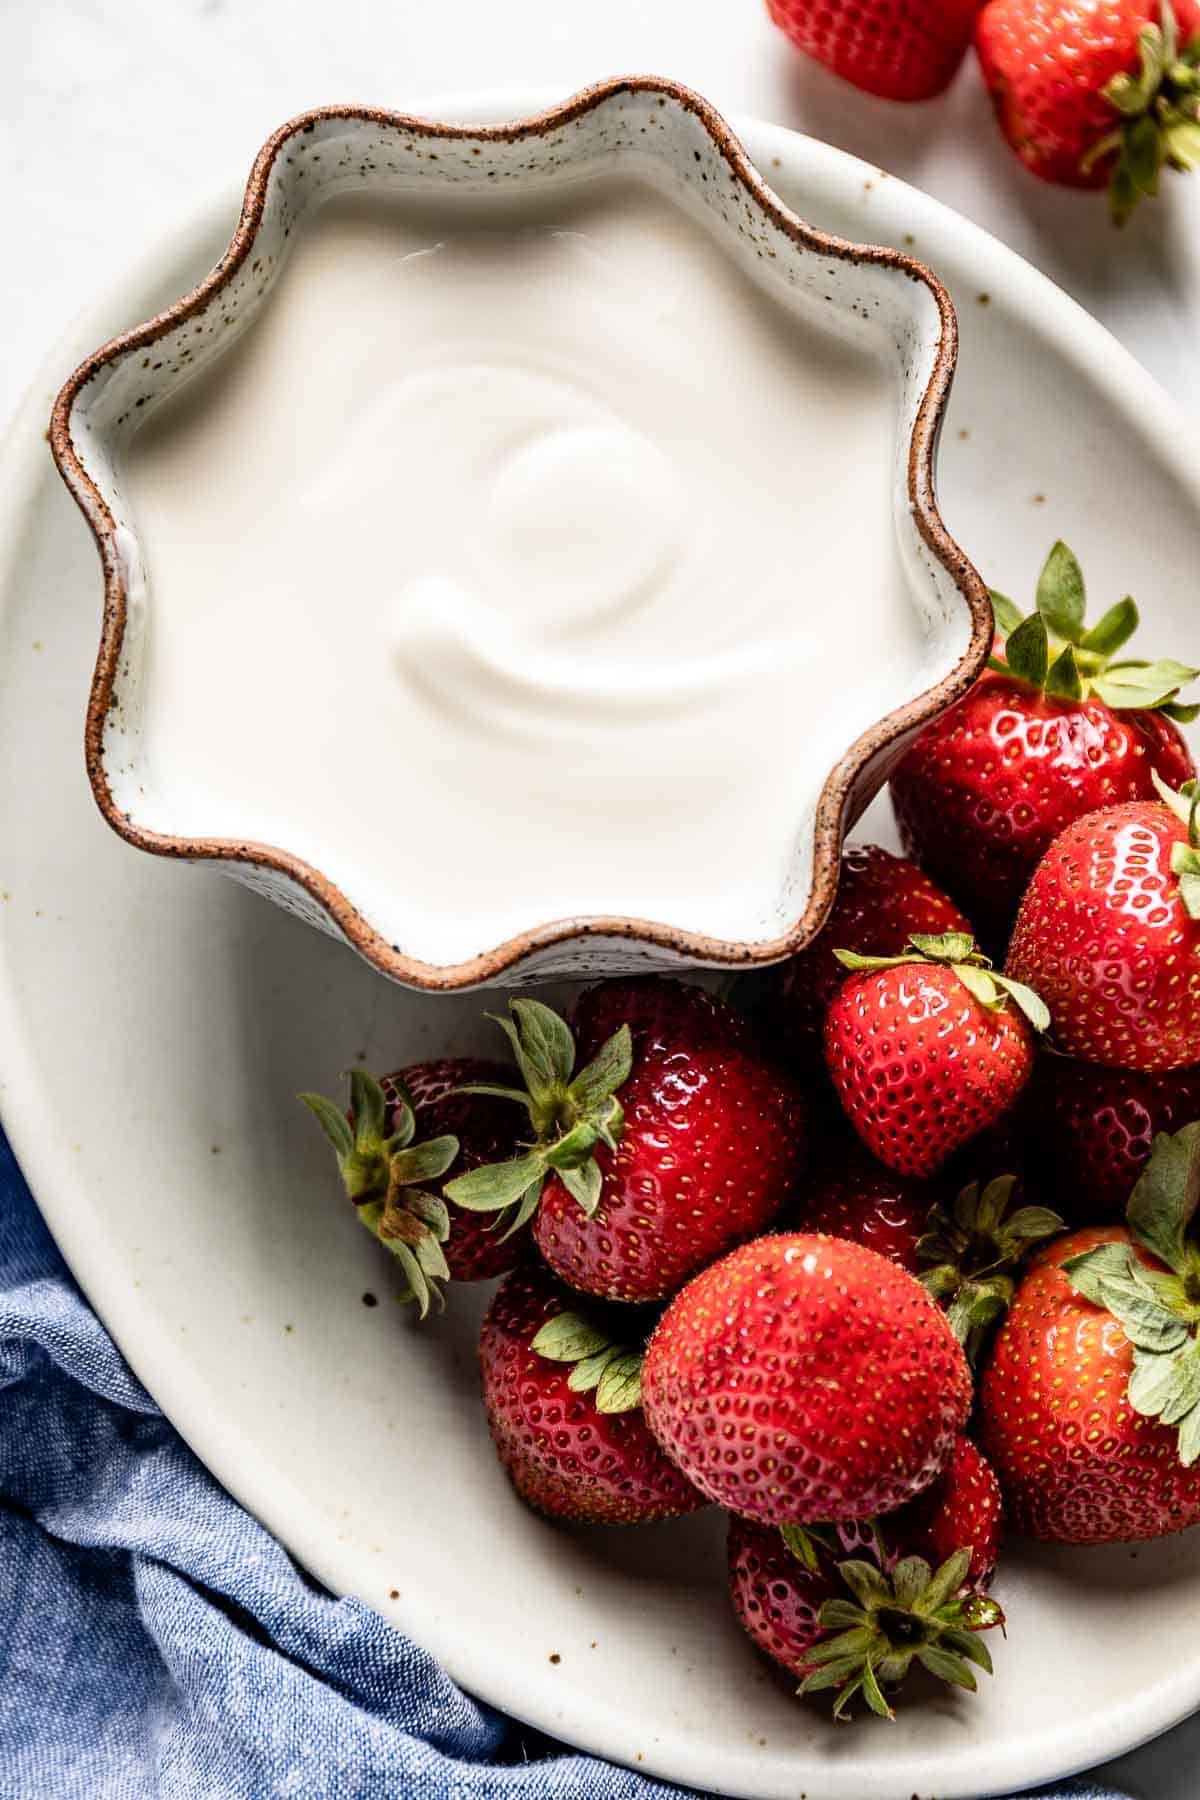 vanilla yogurt in a bowl with strawberries on the side from the top view